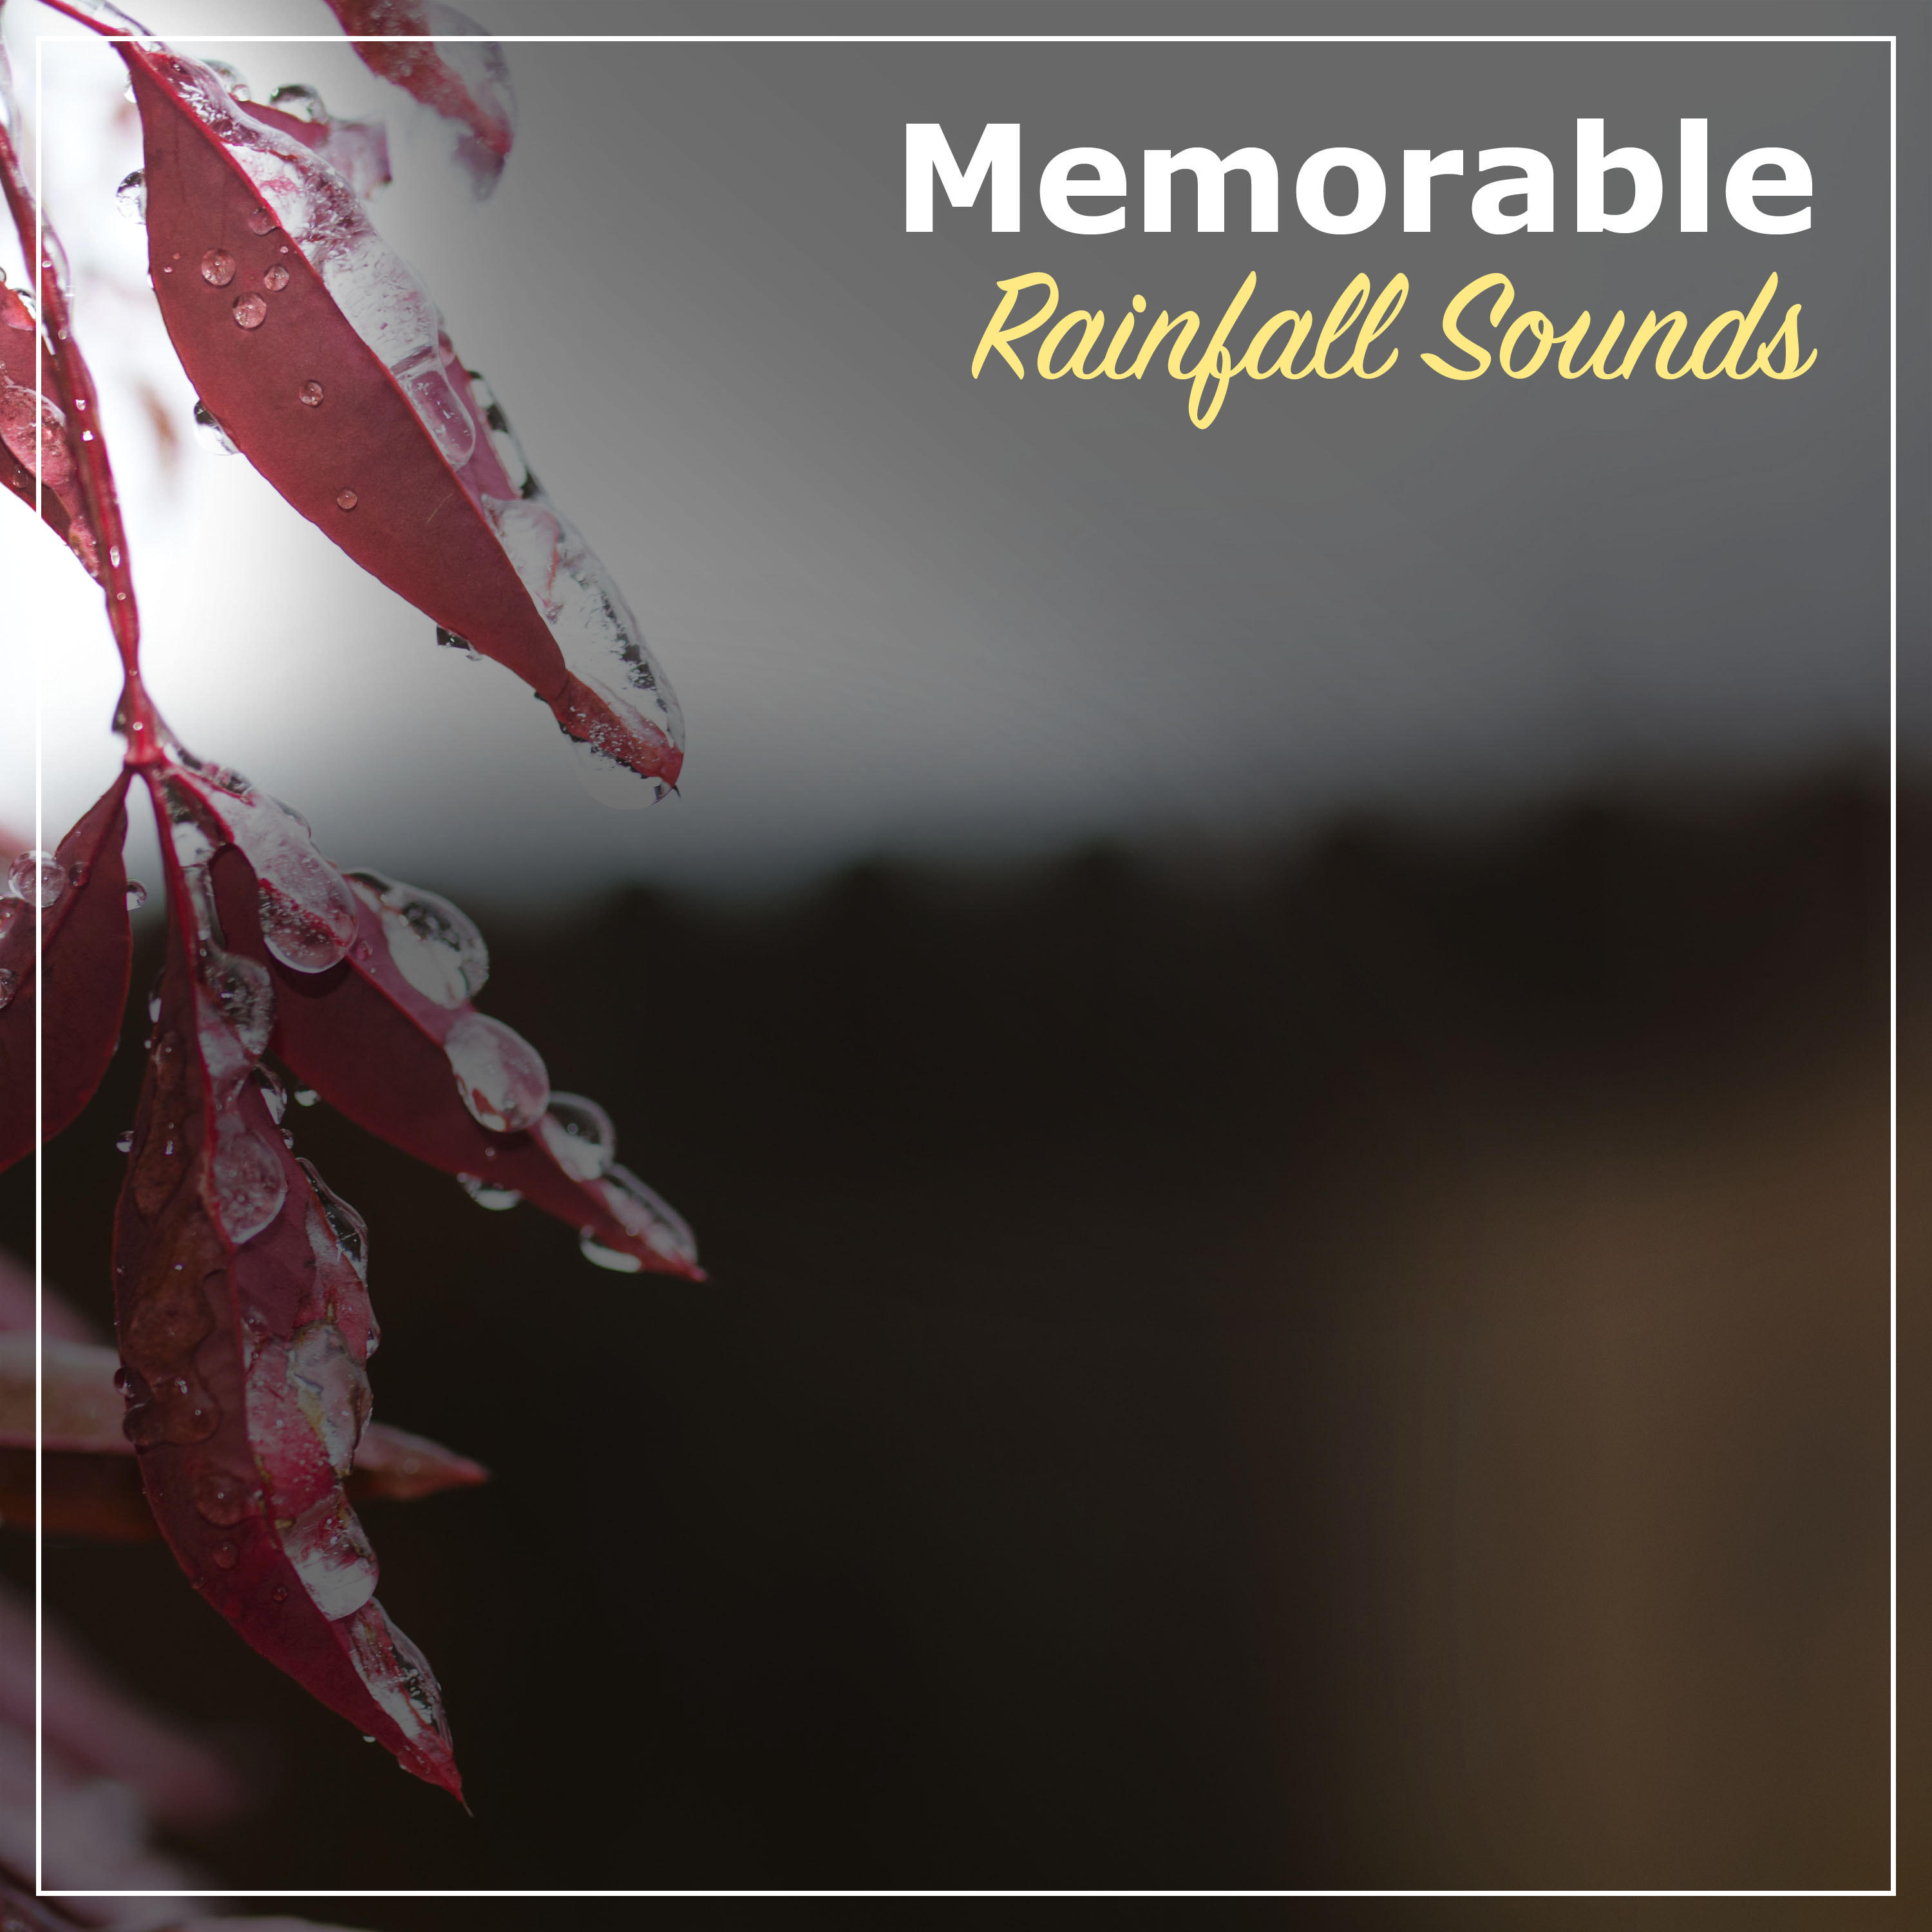 #16 Memorable Rainfall Sounds from Nature